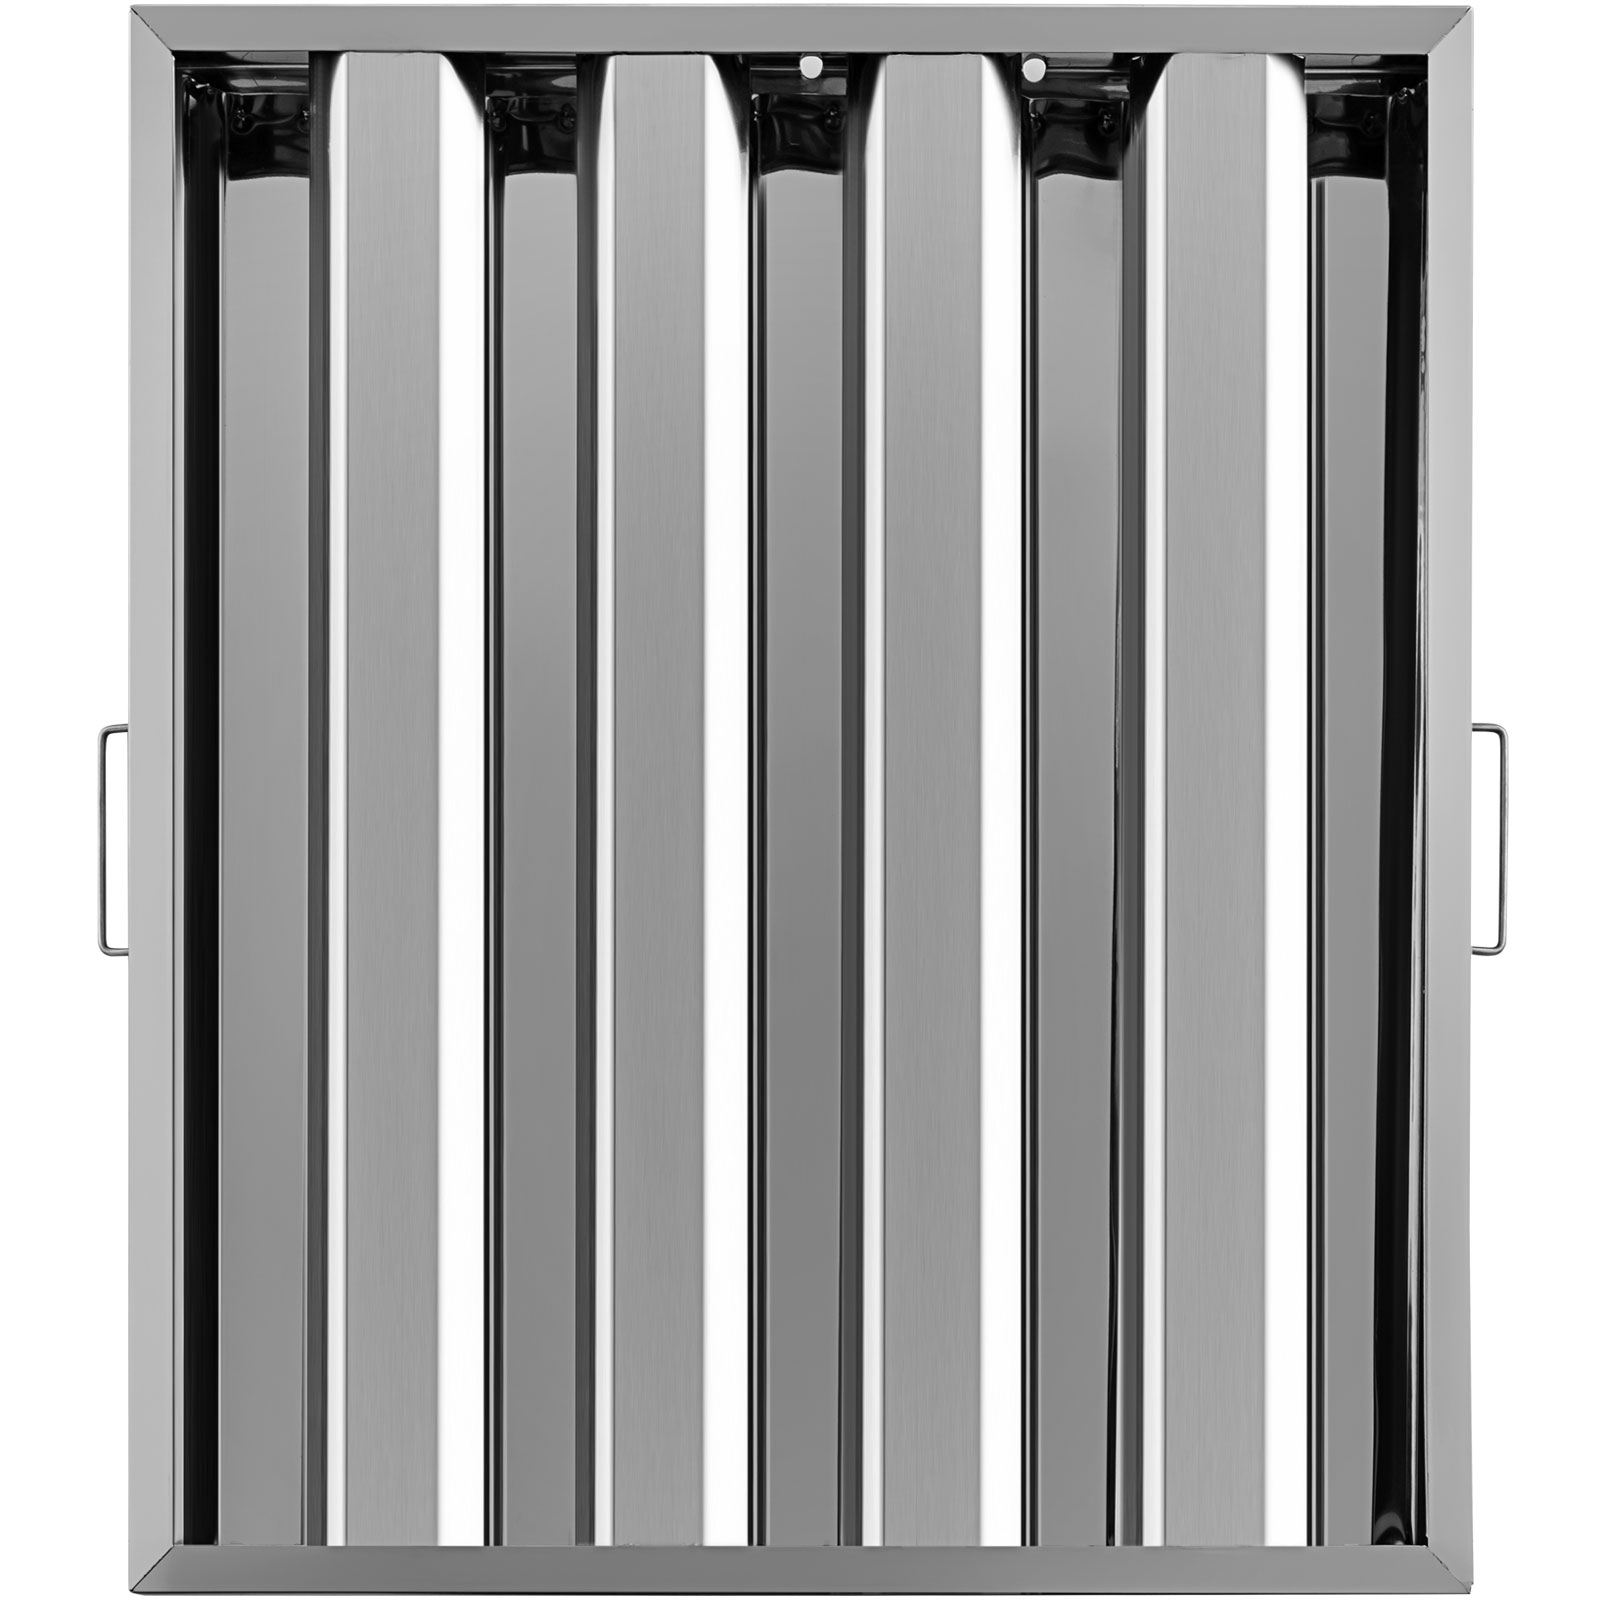 Box of 6 pcs Stainless Steel Commercial Hood Baffle Grease Filter 16 x 20 